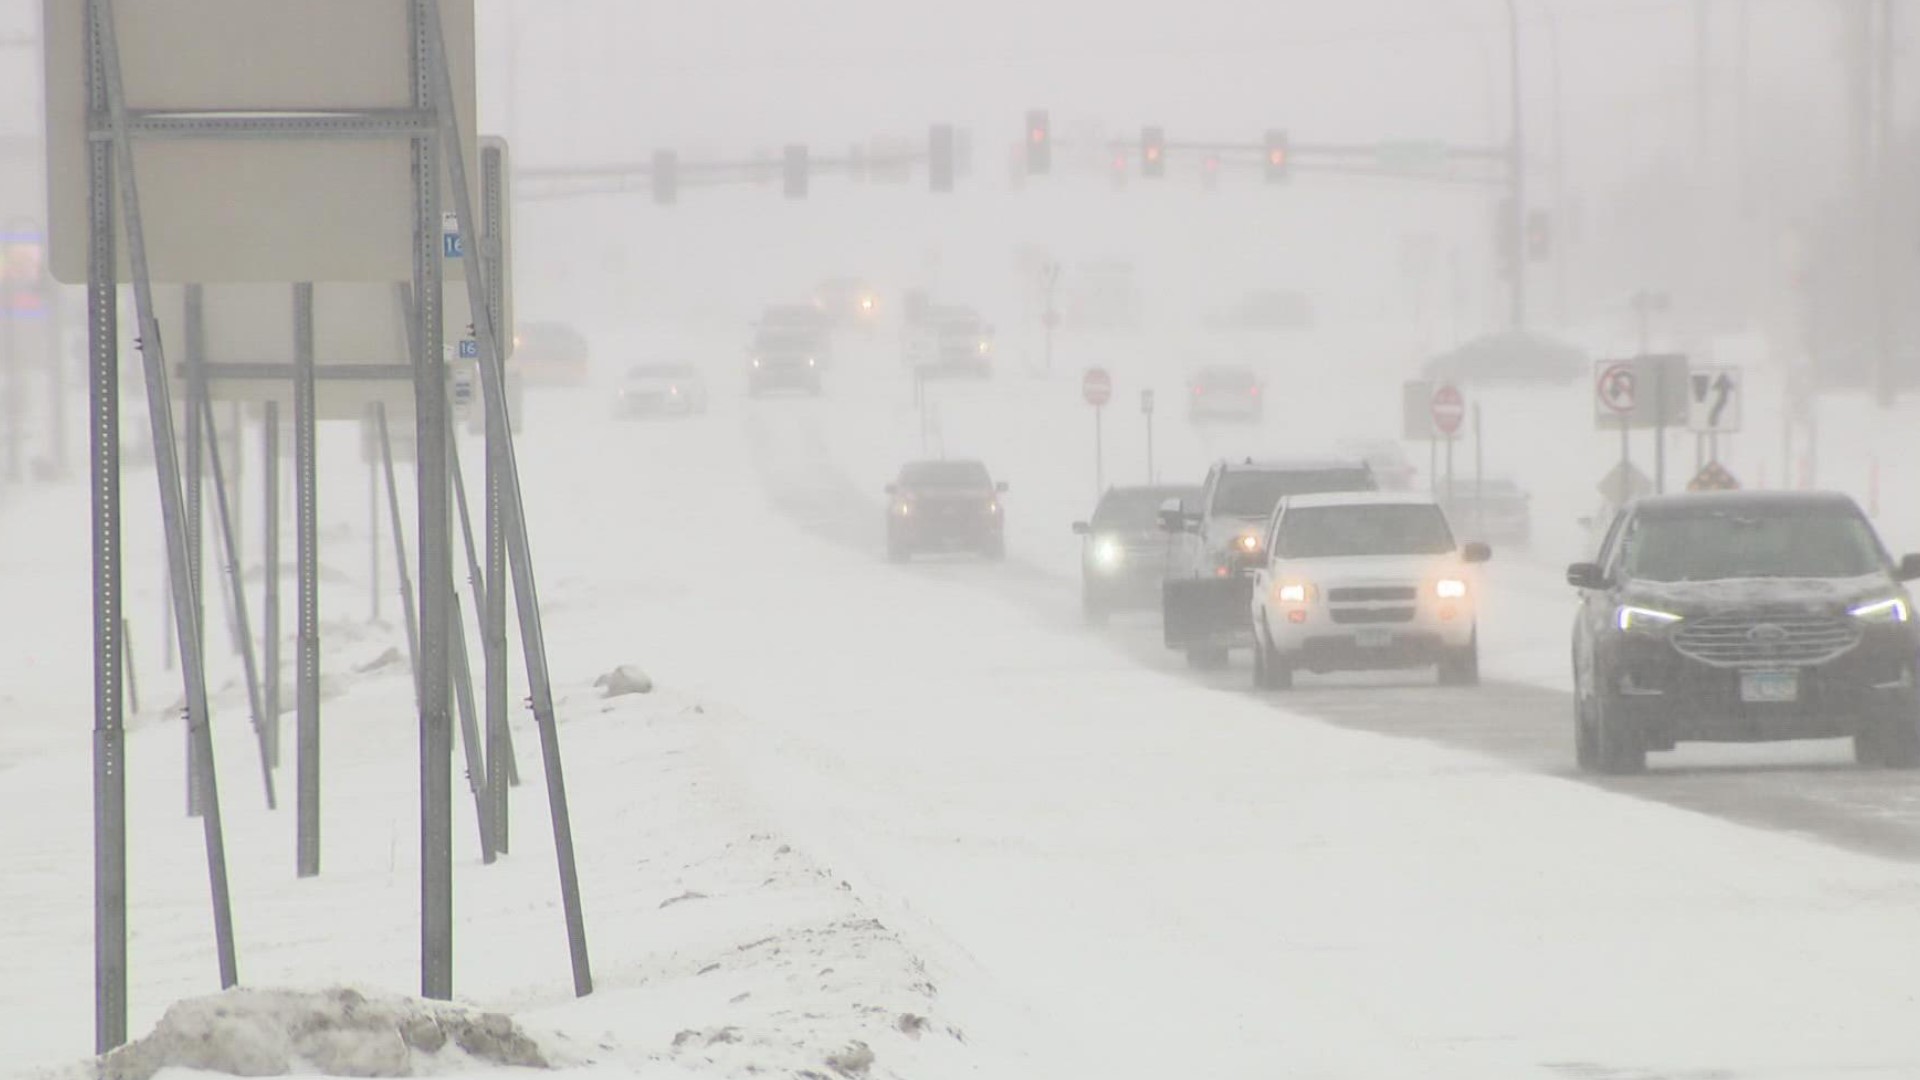 MnDot and local business react to potential for freezing rain or snow this week.